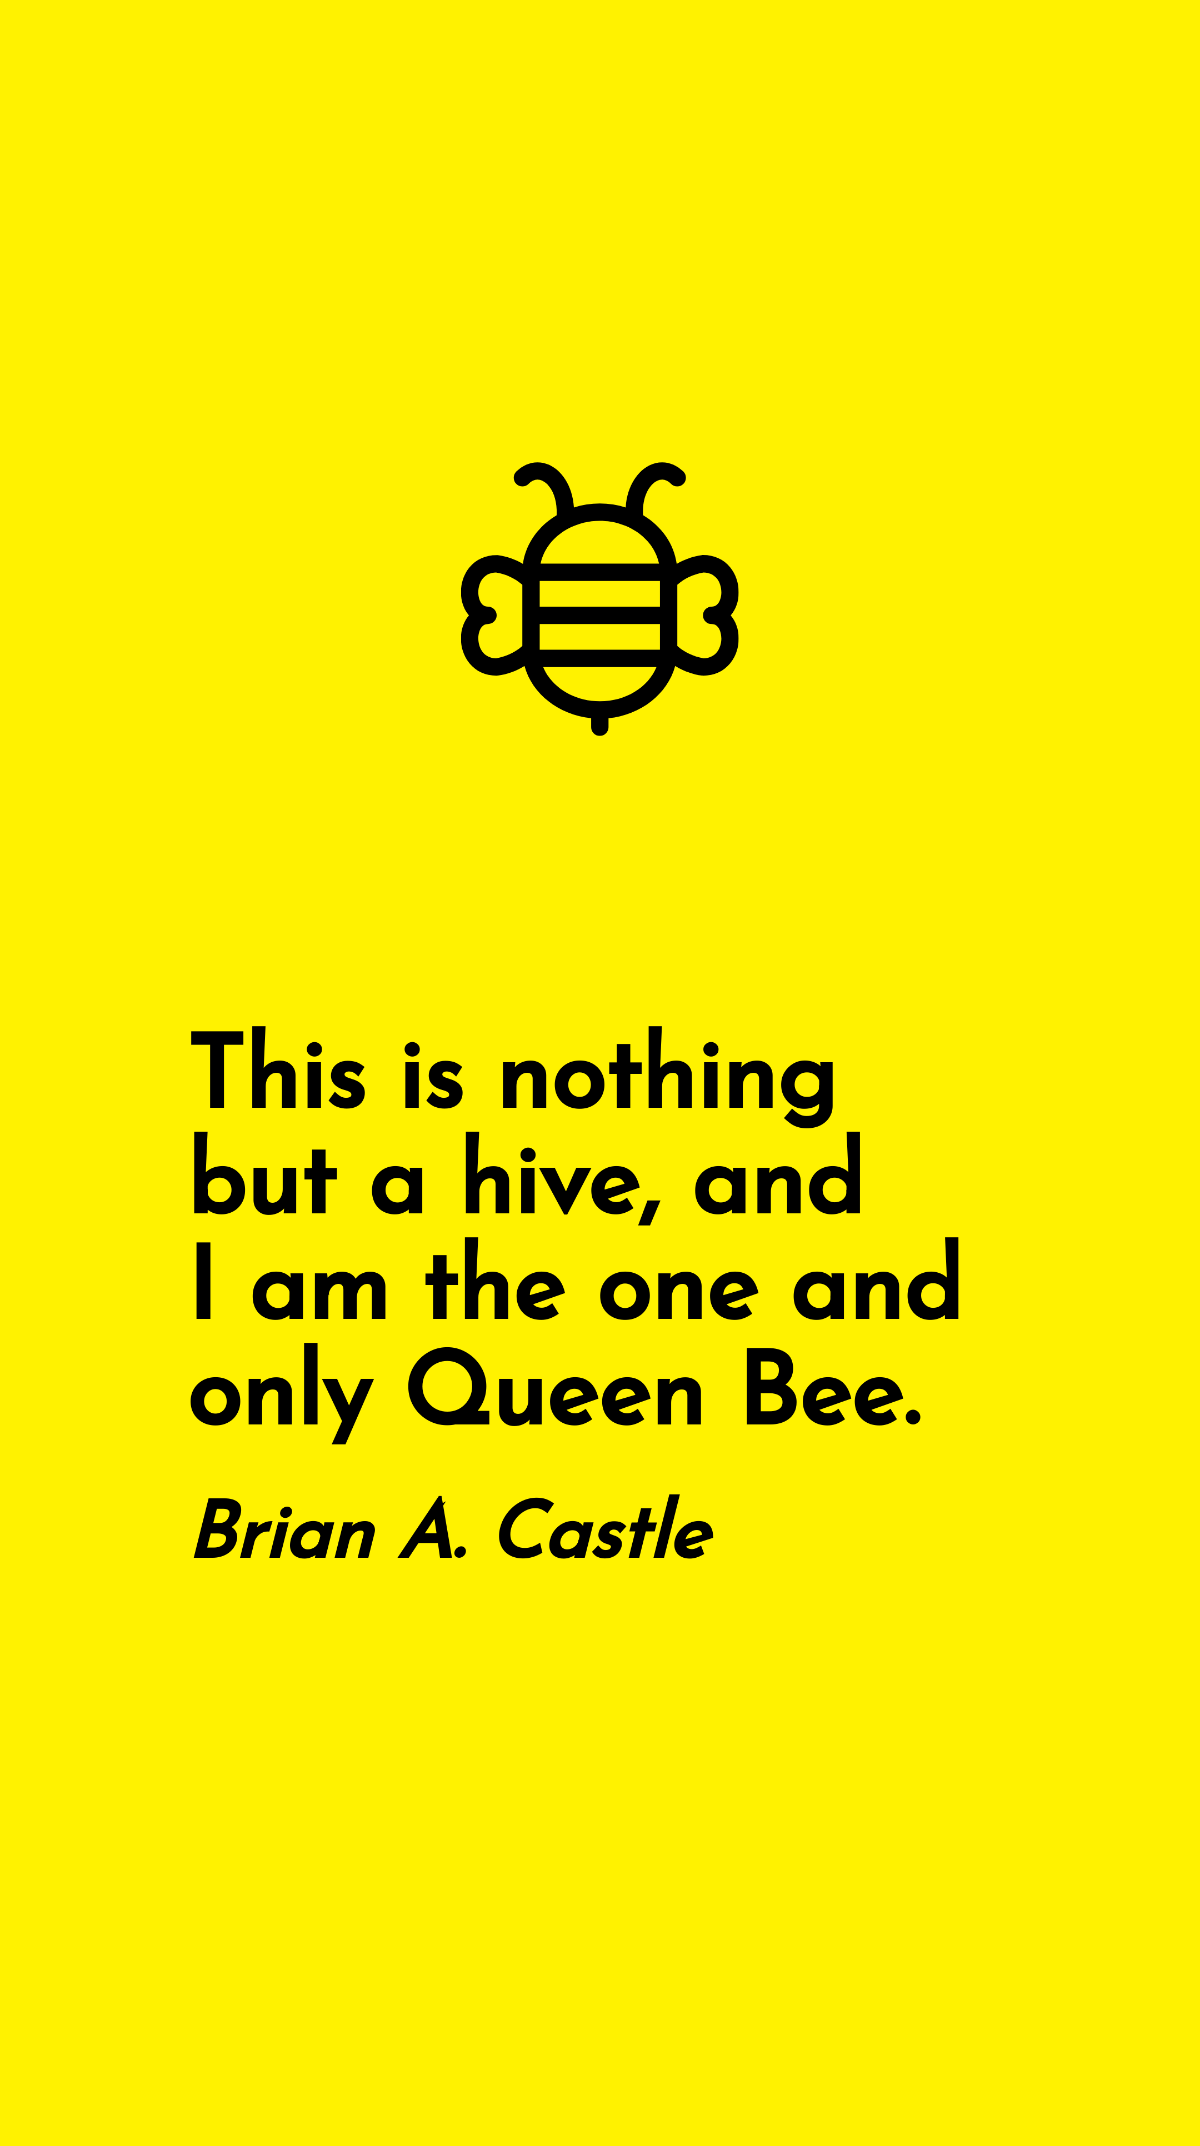 Free Brian A Castle - This is nothing but a hive, and I am the one and only Queen Bee. Template